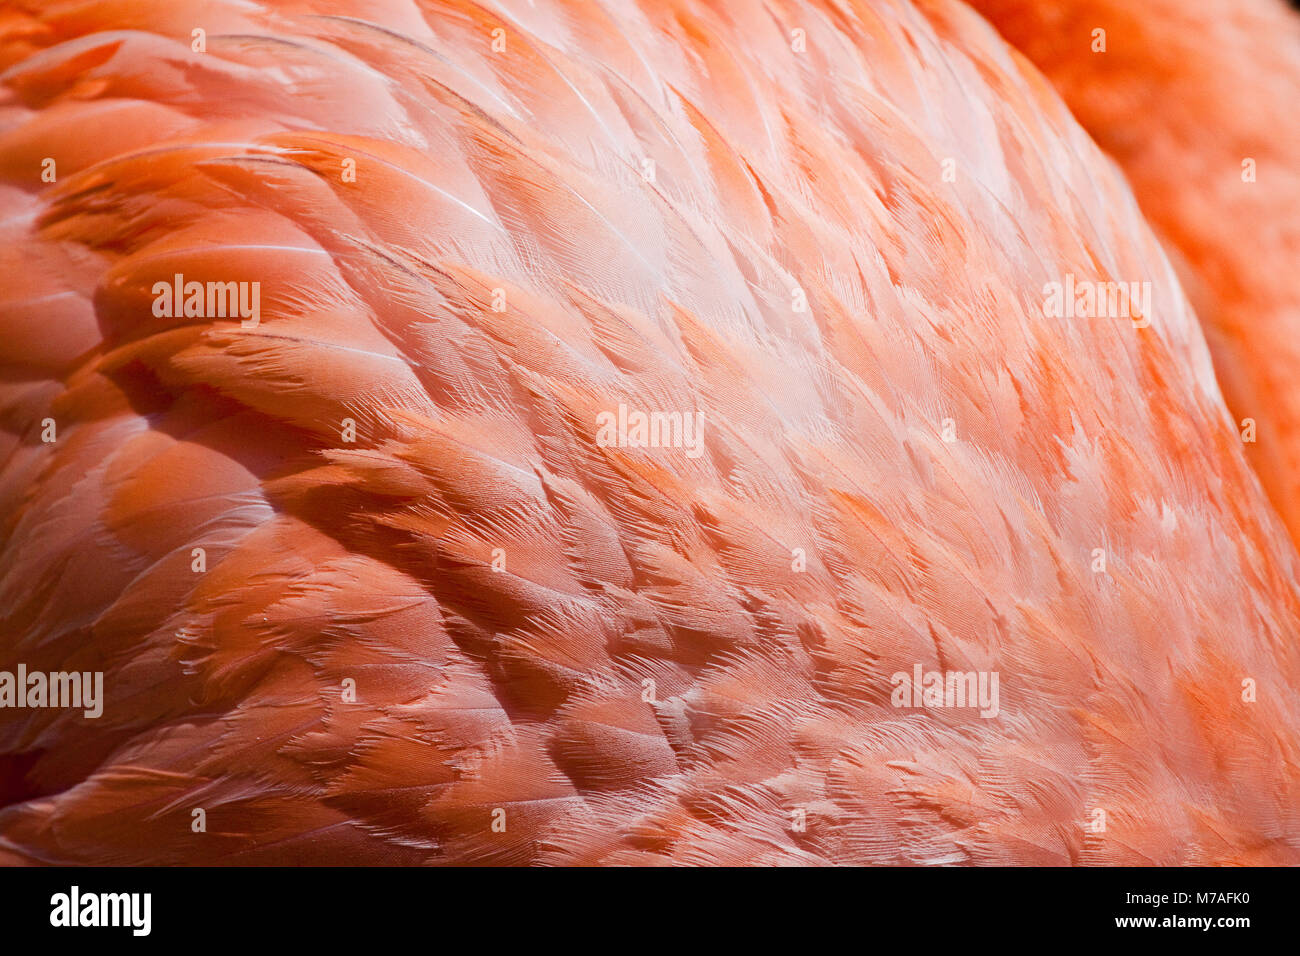 Feather detail of a greater flamingo, Phoenicopterus rubber, in a pond on the island of Bonaire, in the Caribbean. Stock Photo